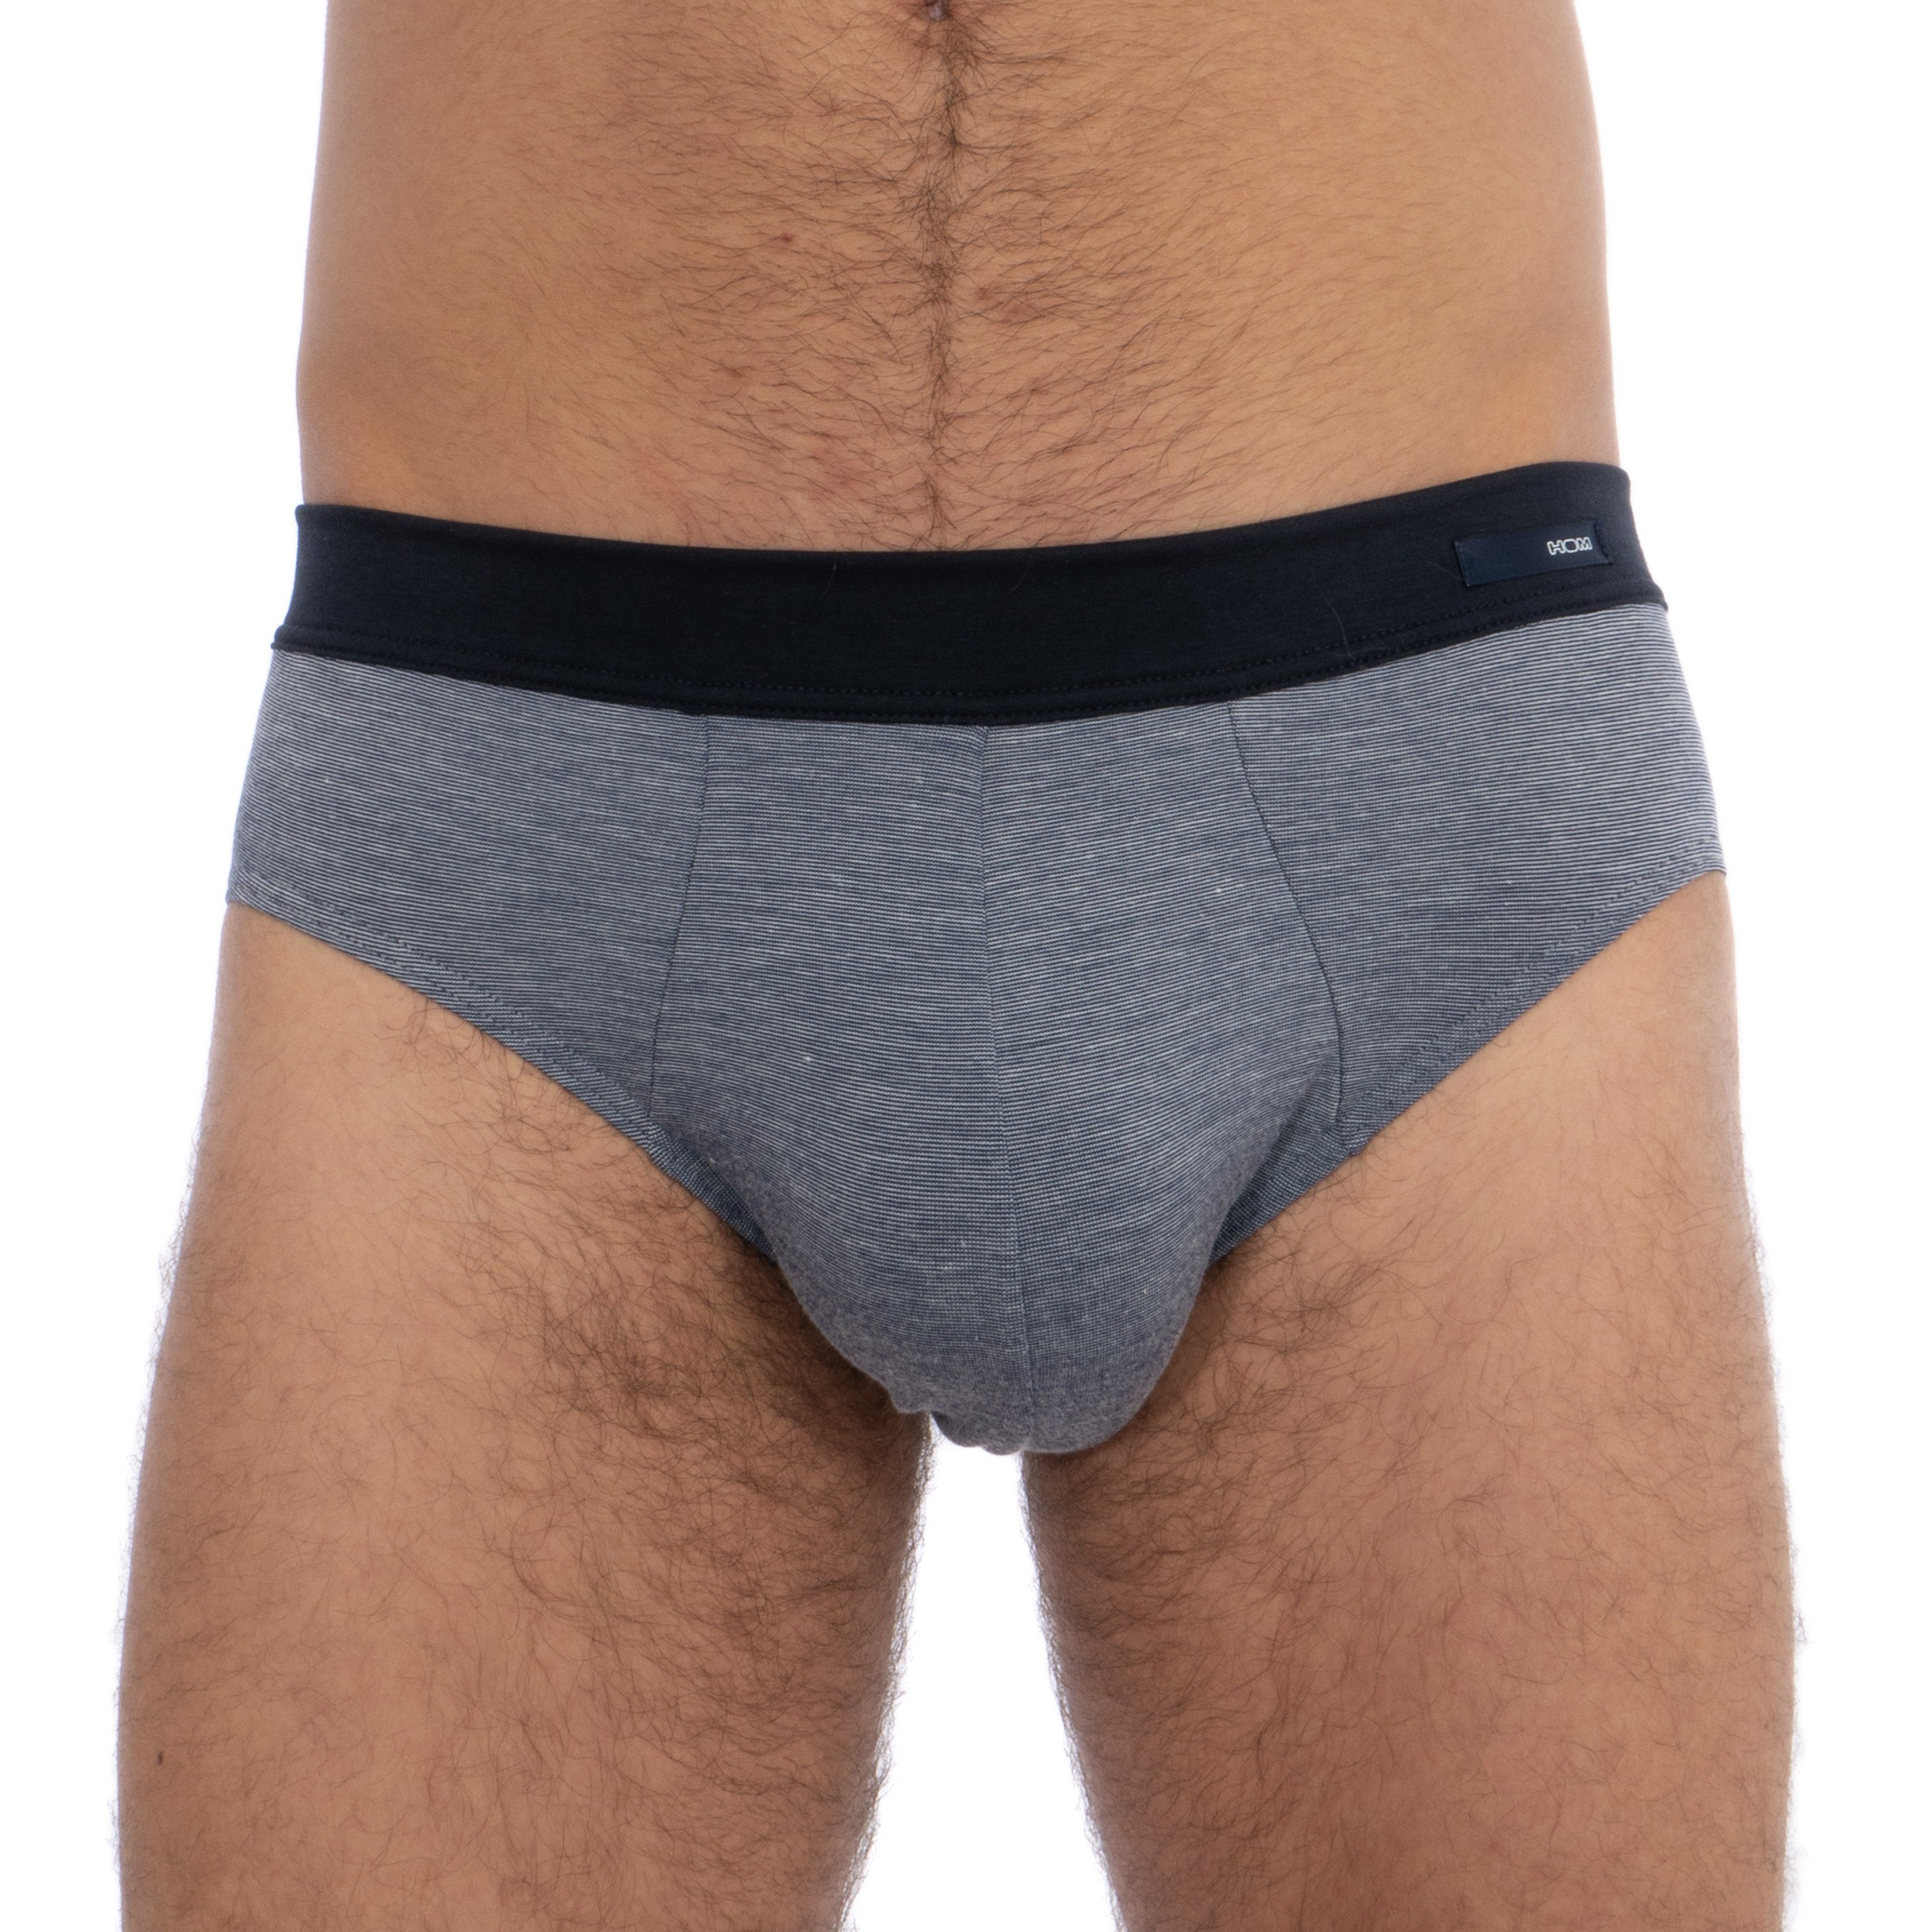 slip homme marque hom